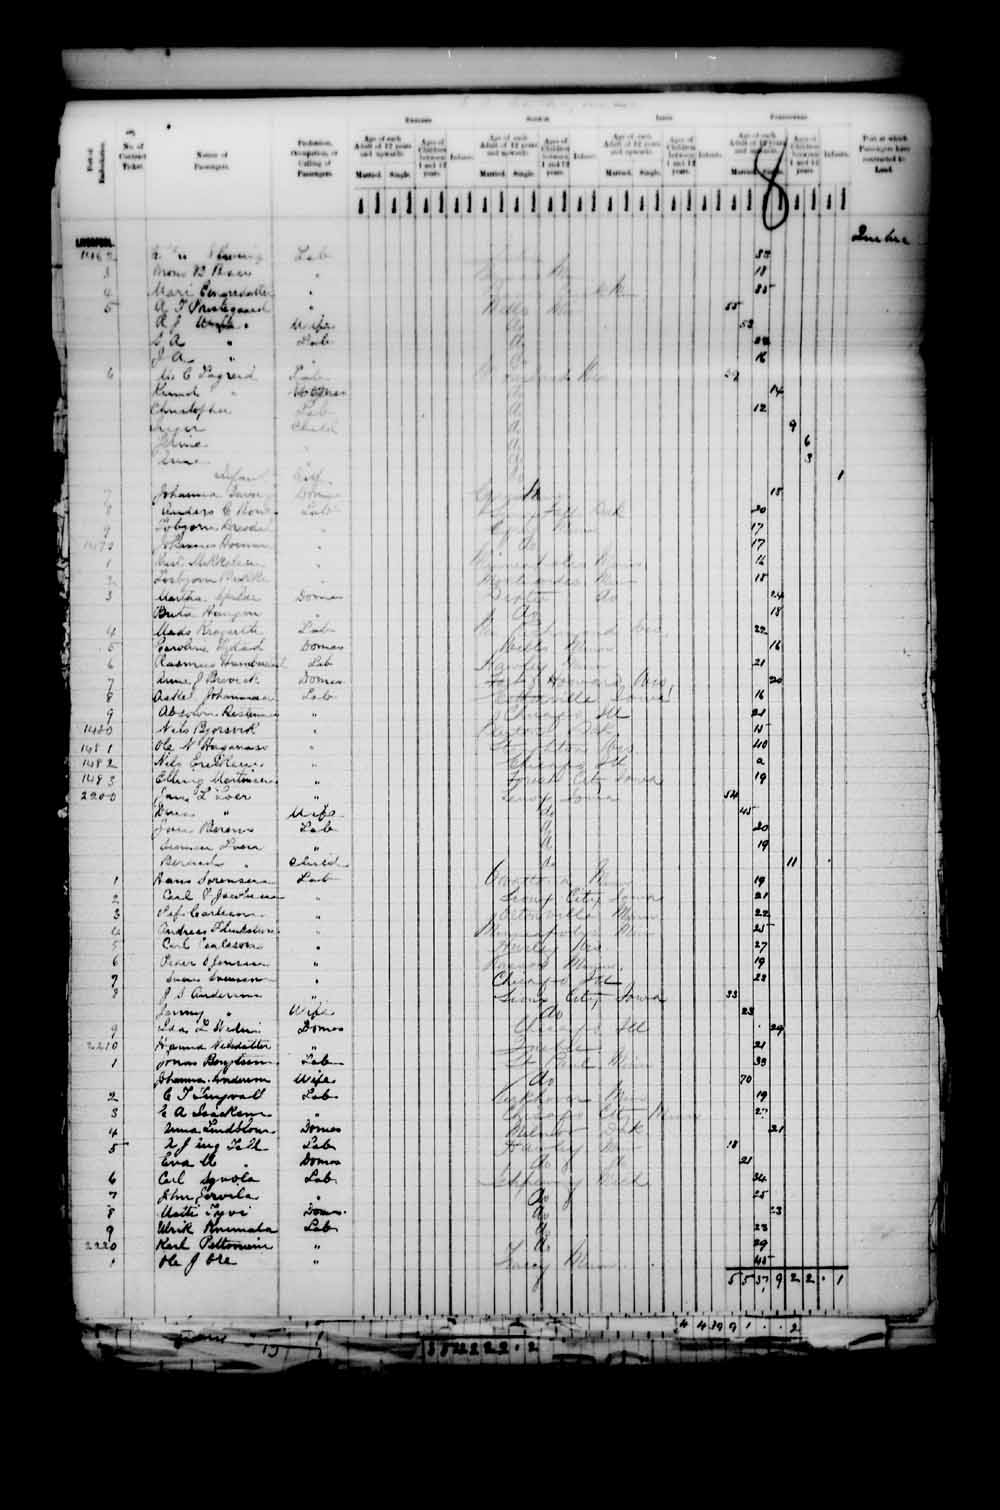 Digitized page of Passenger Lists for Image No.: e003546737